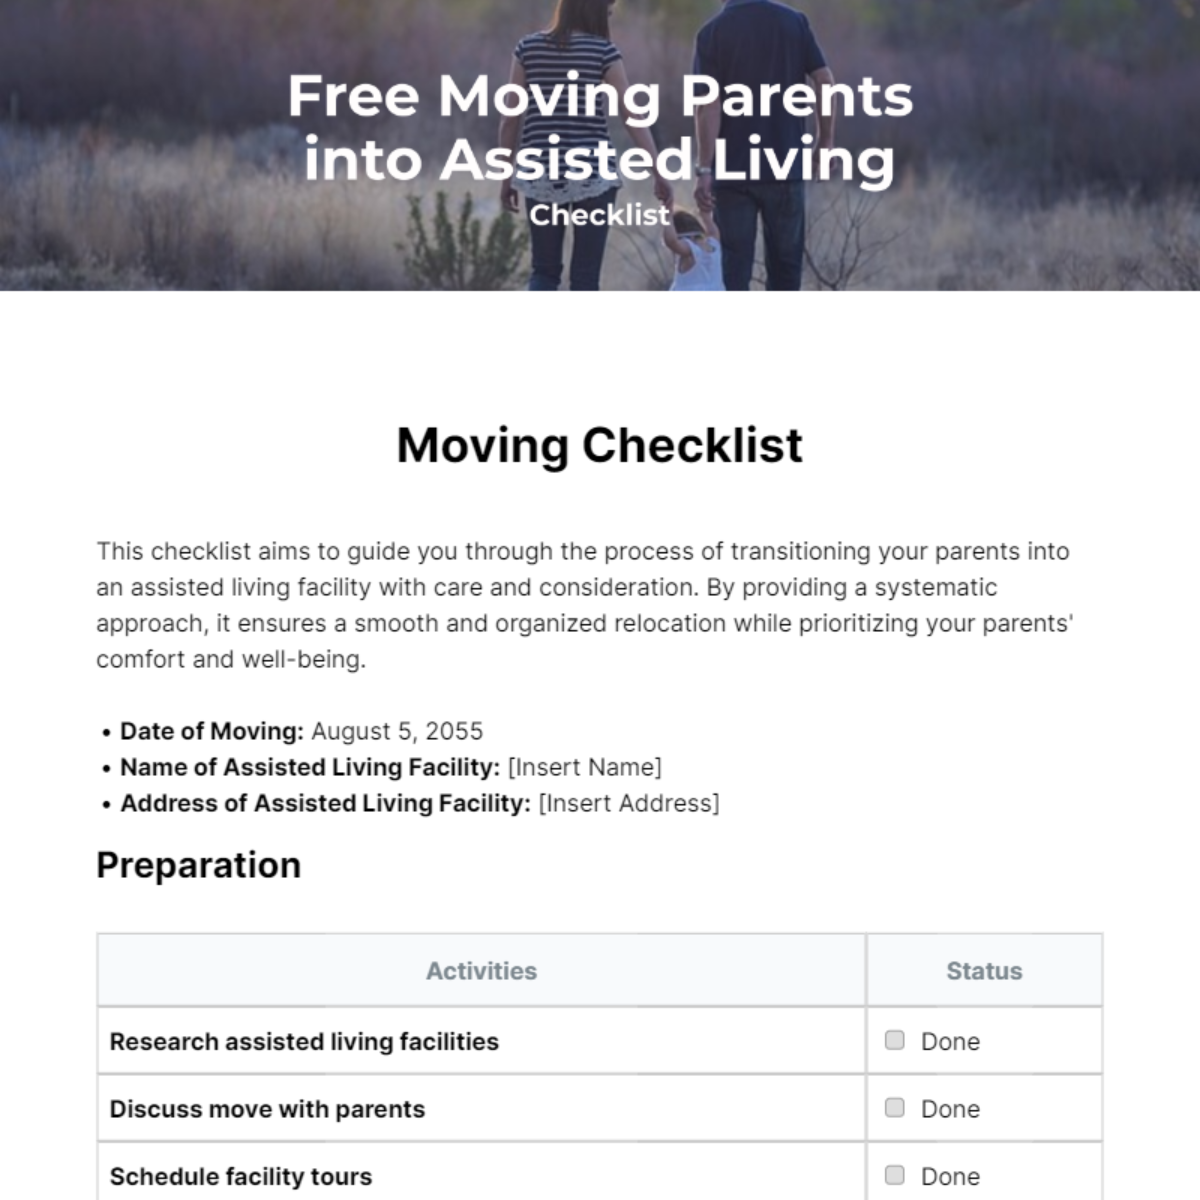 Free Moving Parents into Assisted Living Checklist Template